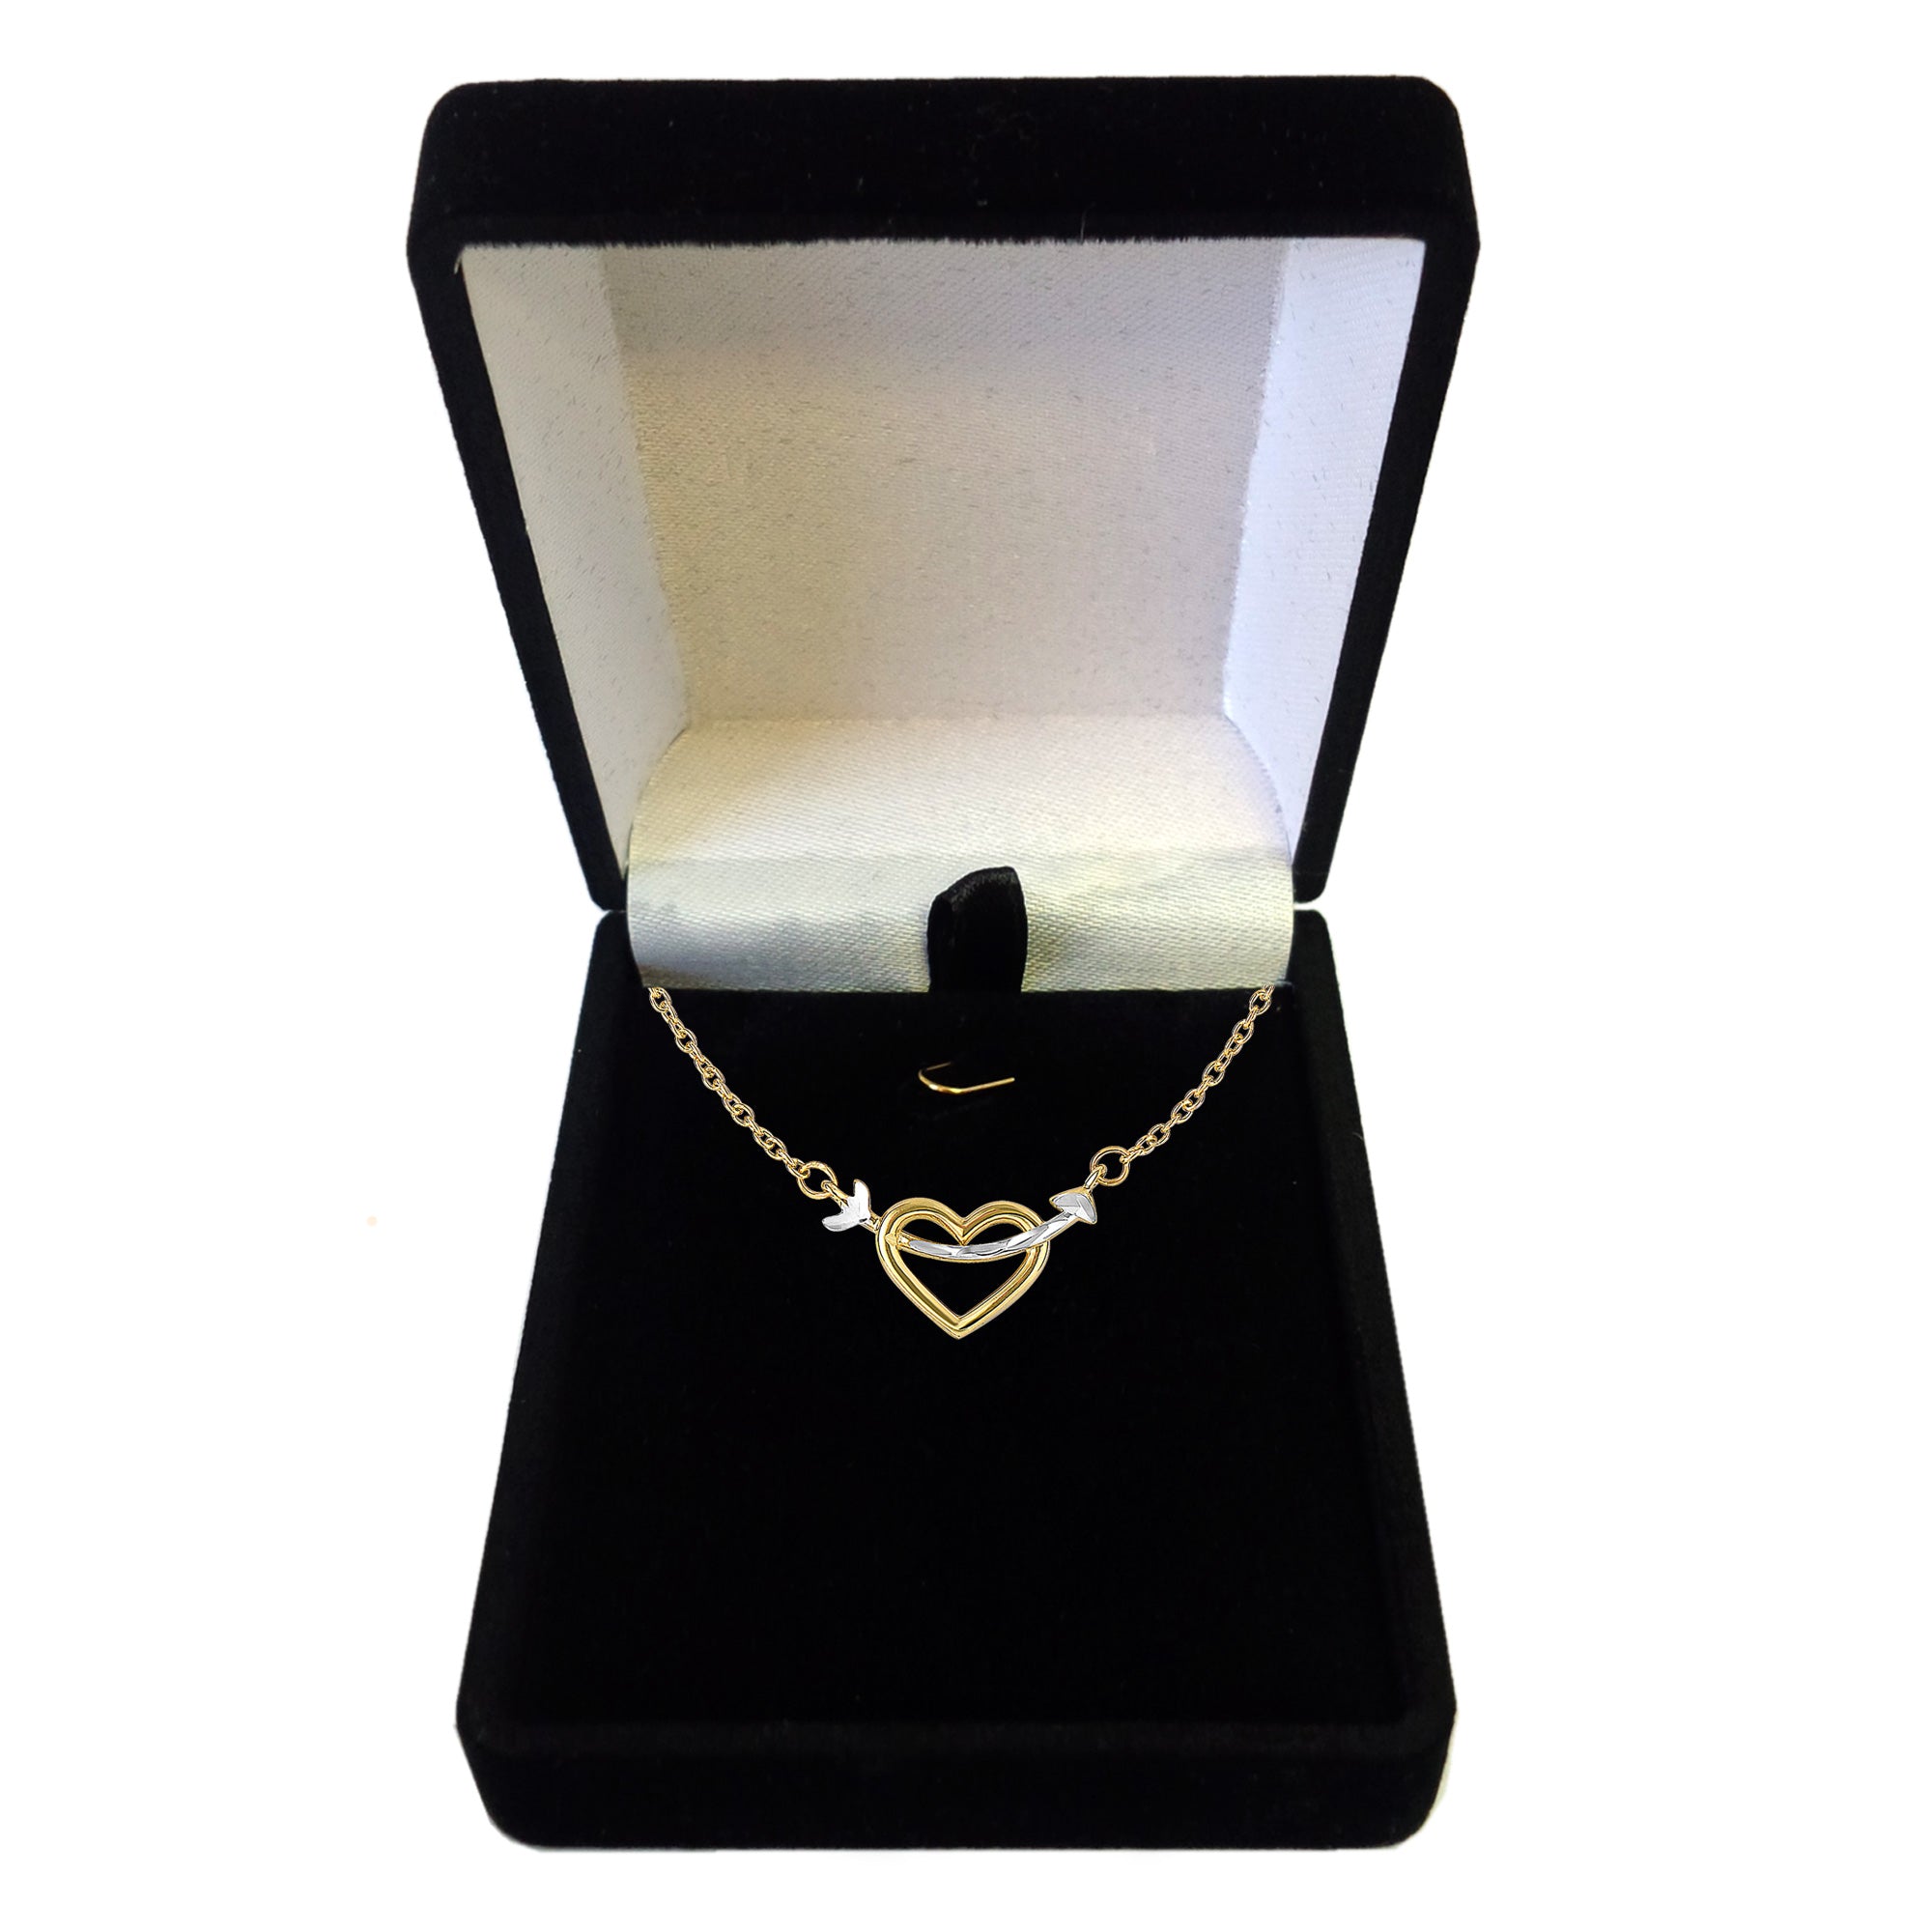 14K Two Tone Gold Arrow Through Open Heart Pendant Necklace, 18" fine designer jewelry for men and women